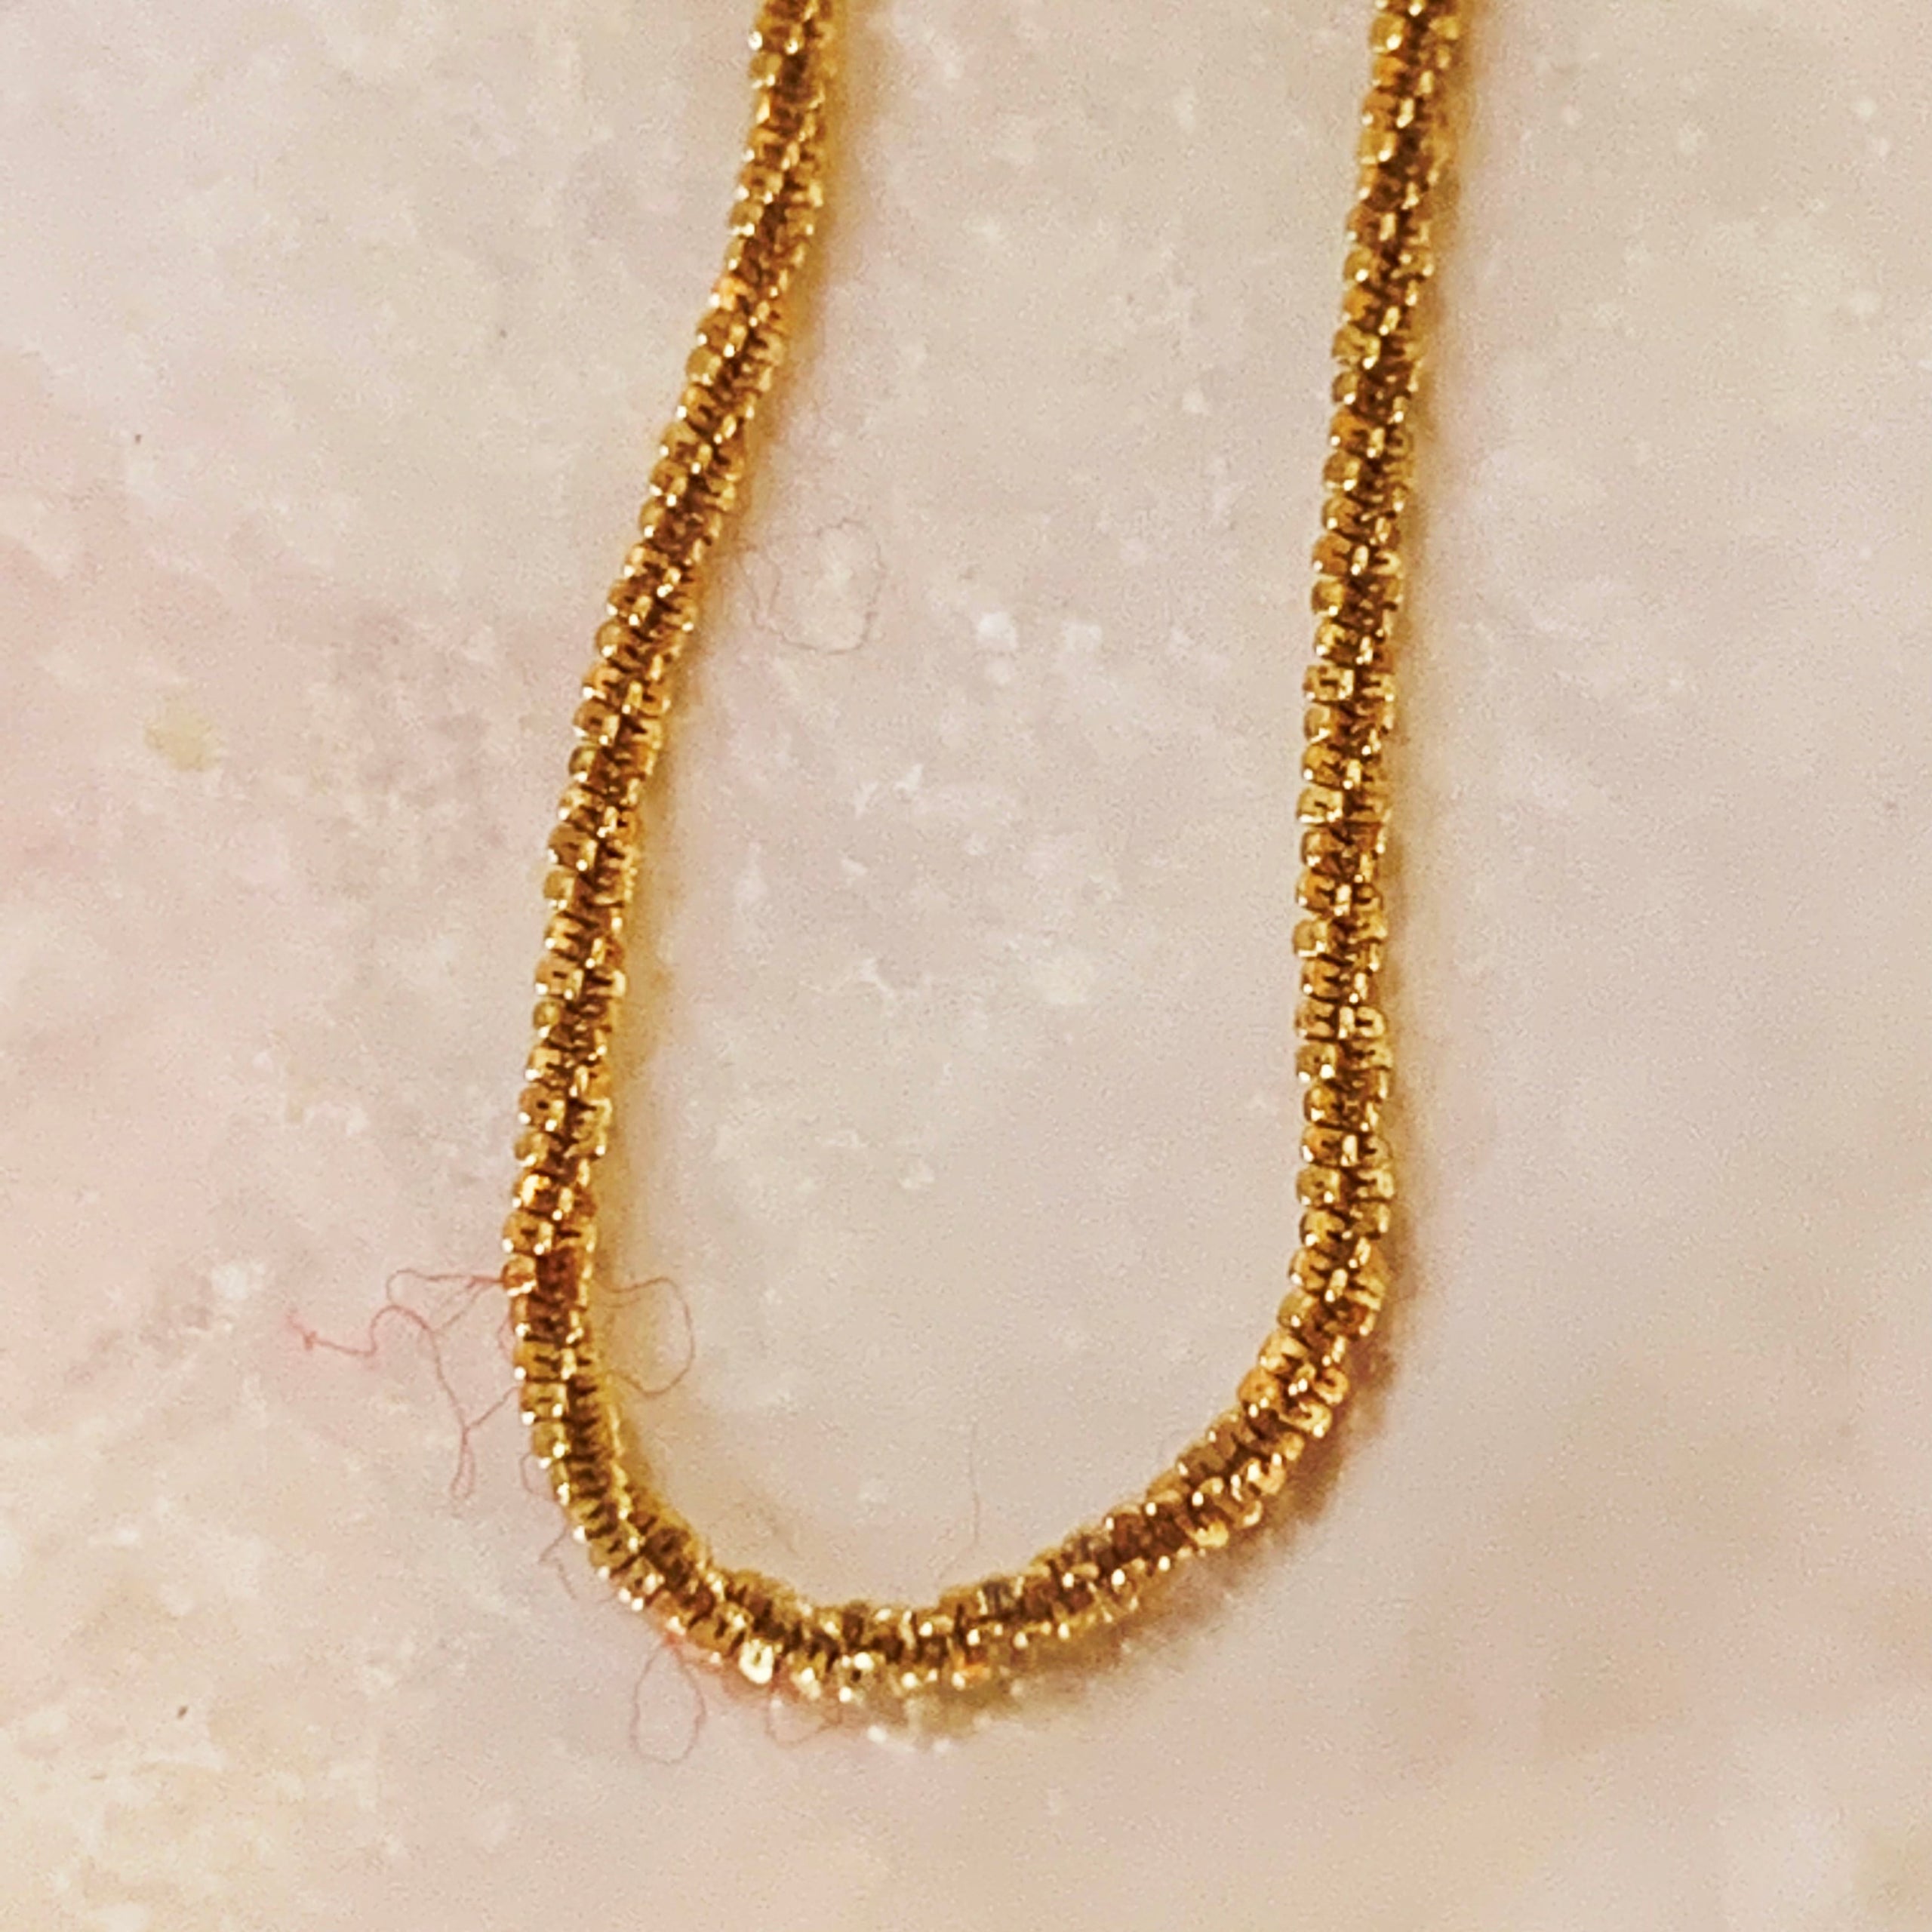 Vintage classic 18” necklace in Gold vermeil